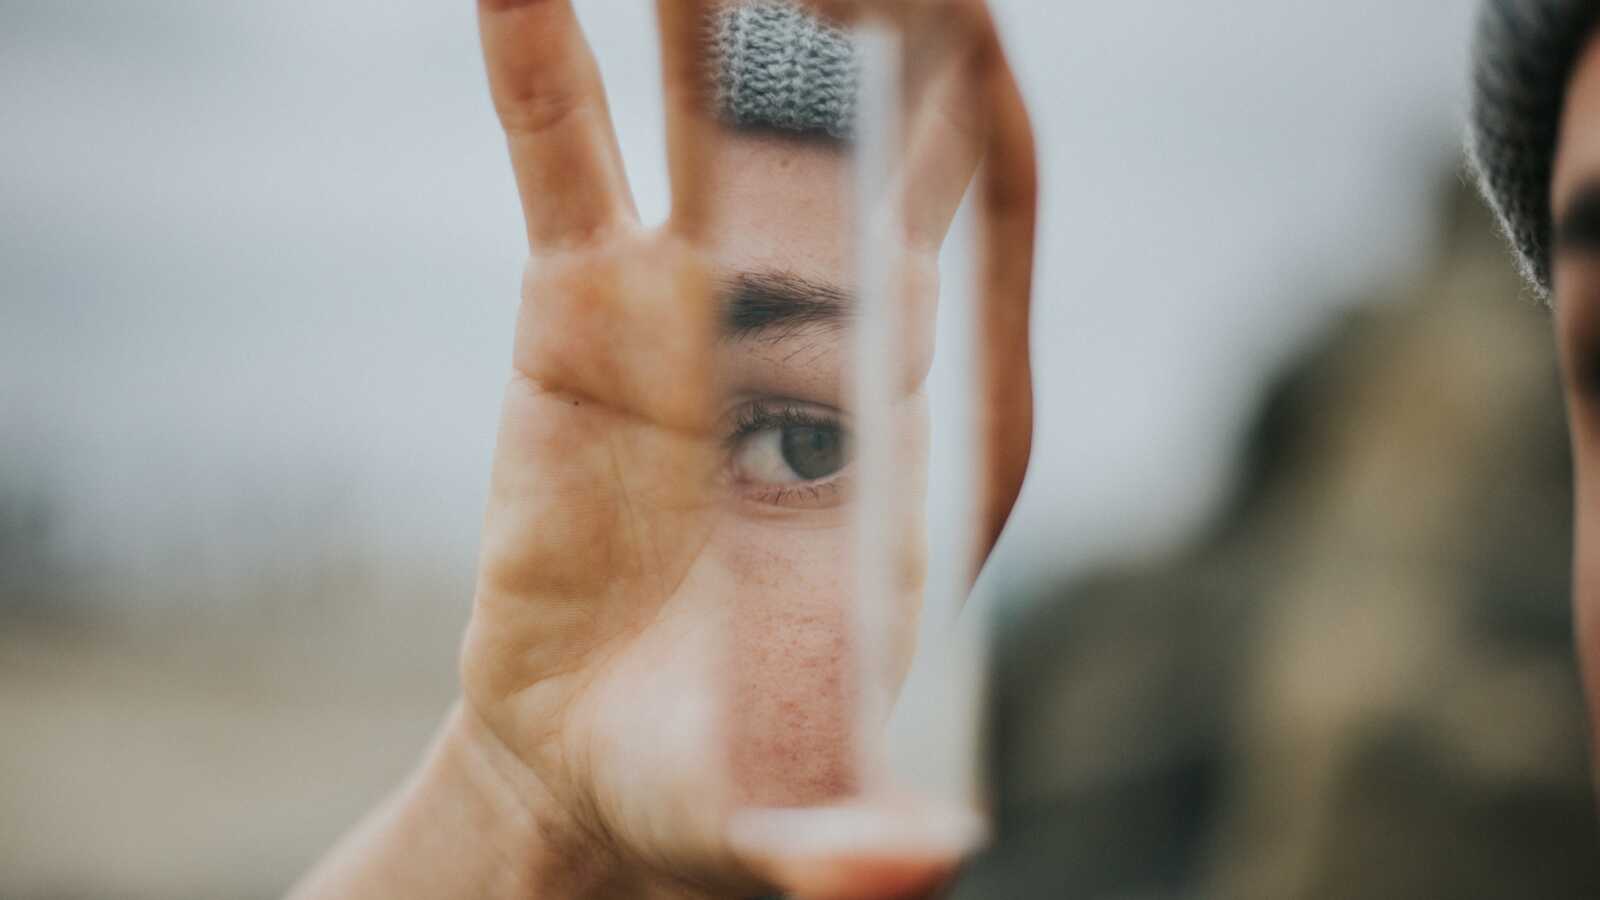 A person holds a reflective item in their hand